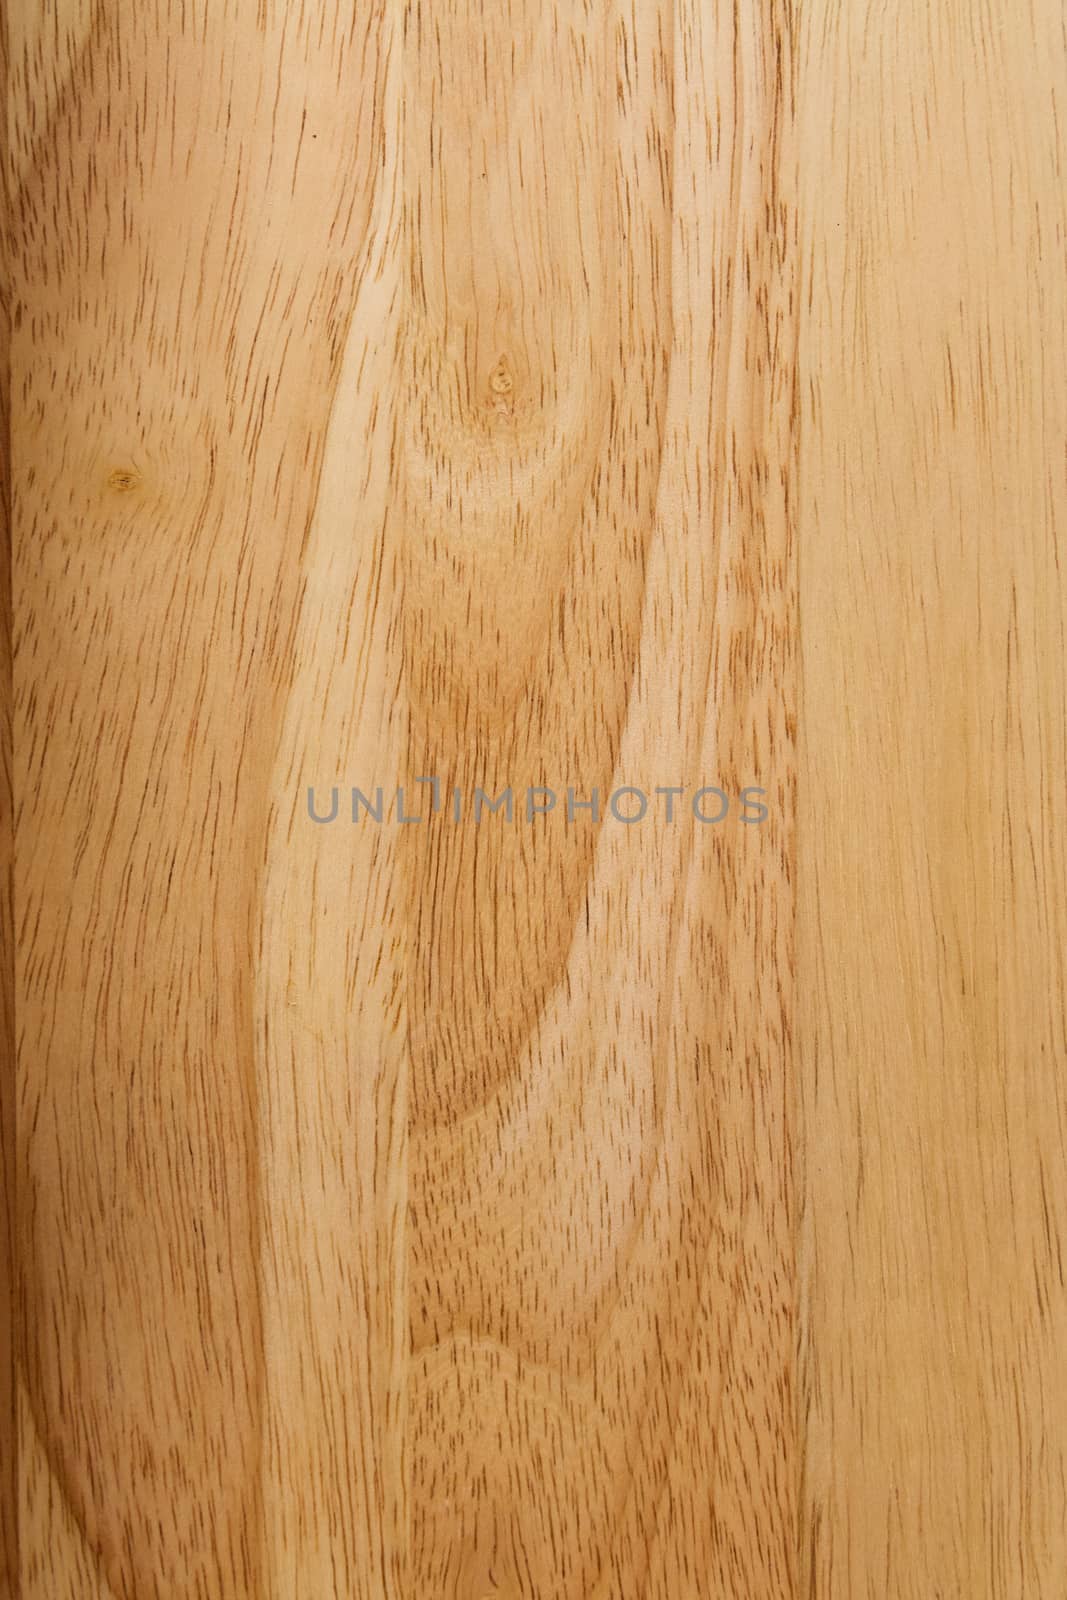 The smooth, polished surface made of natural hardwood trees cont